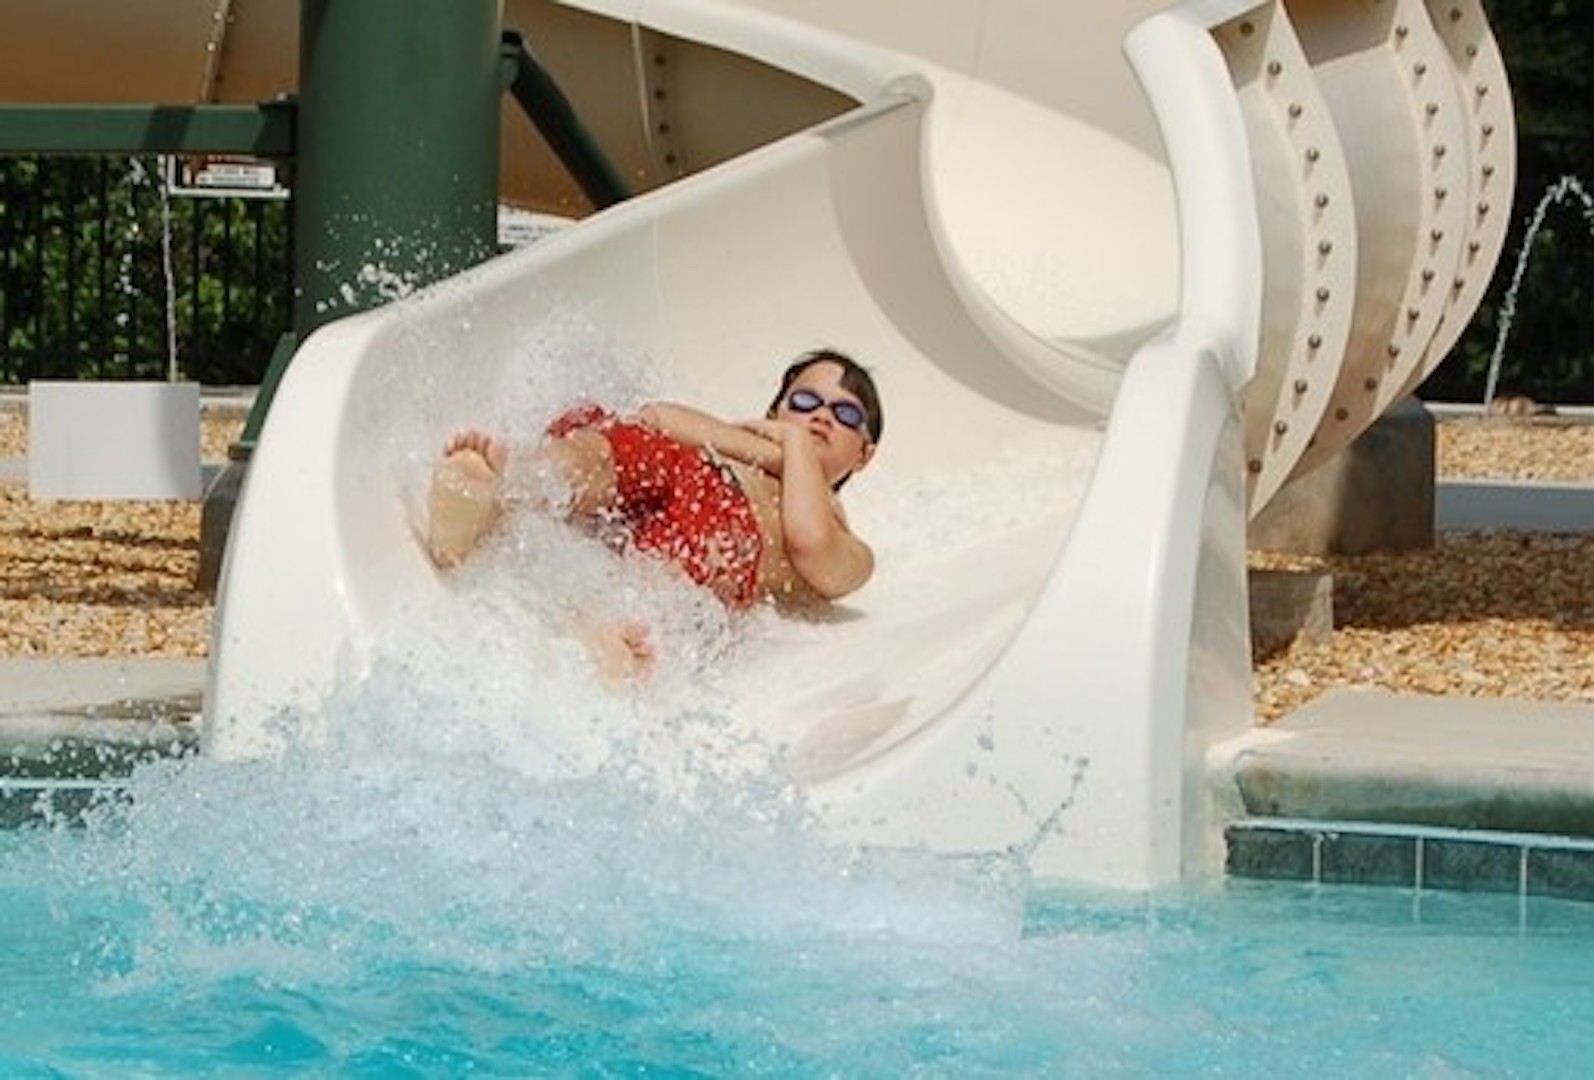 A child in a water slide